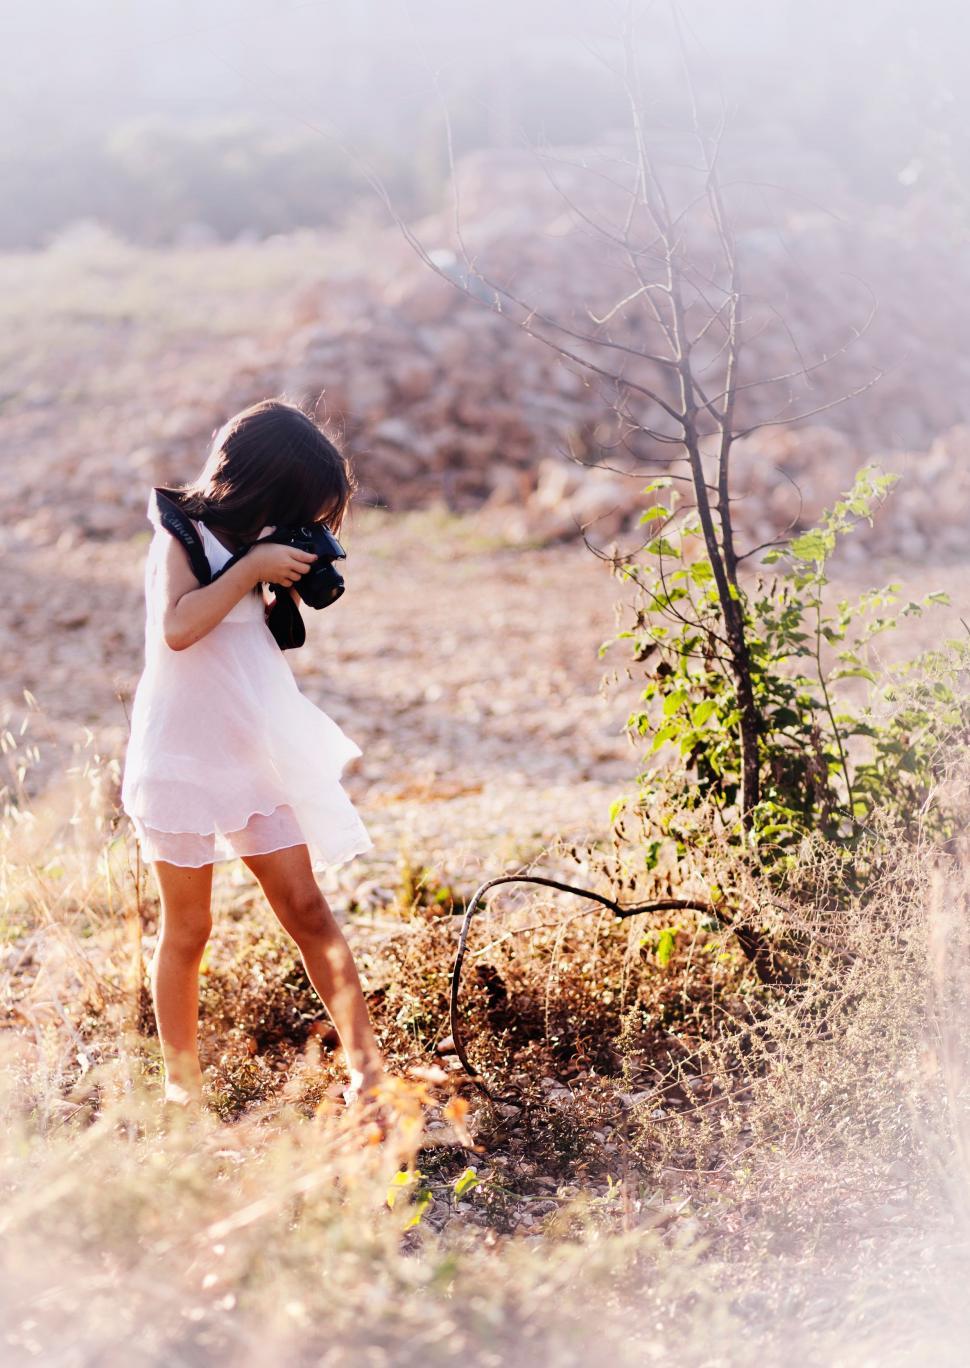 Free Image of Little Girl in White Dress Holding Camera 